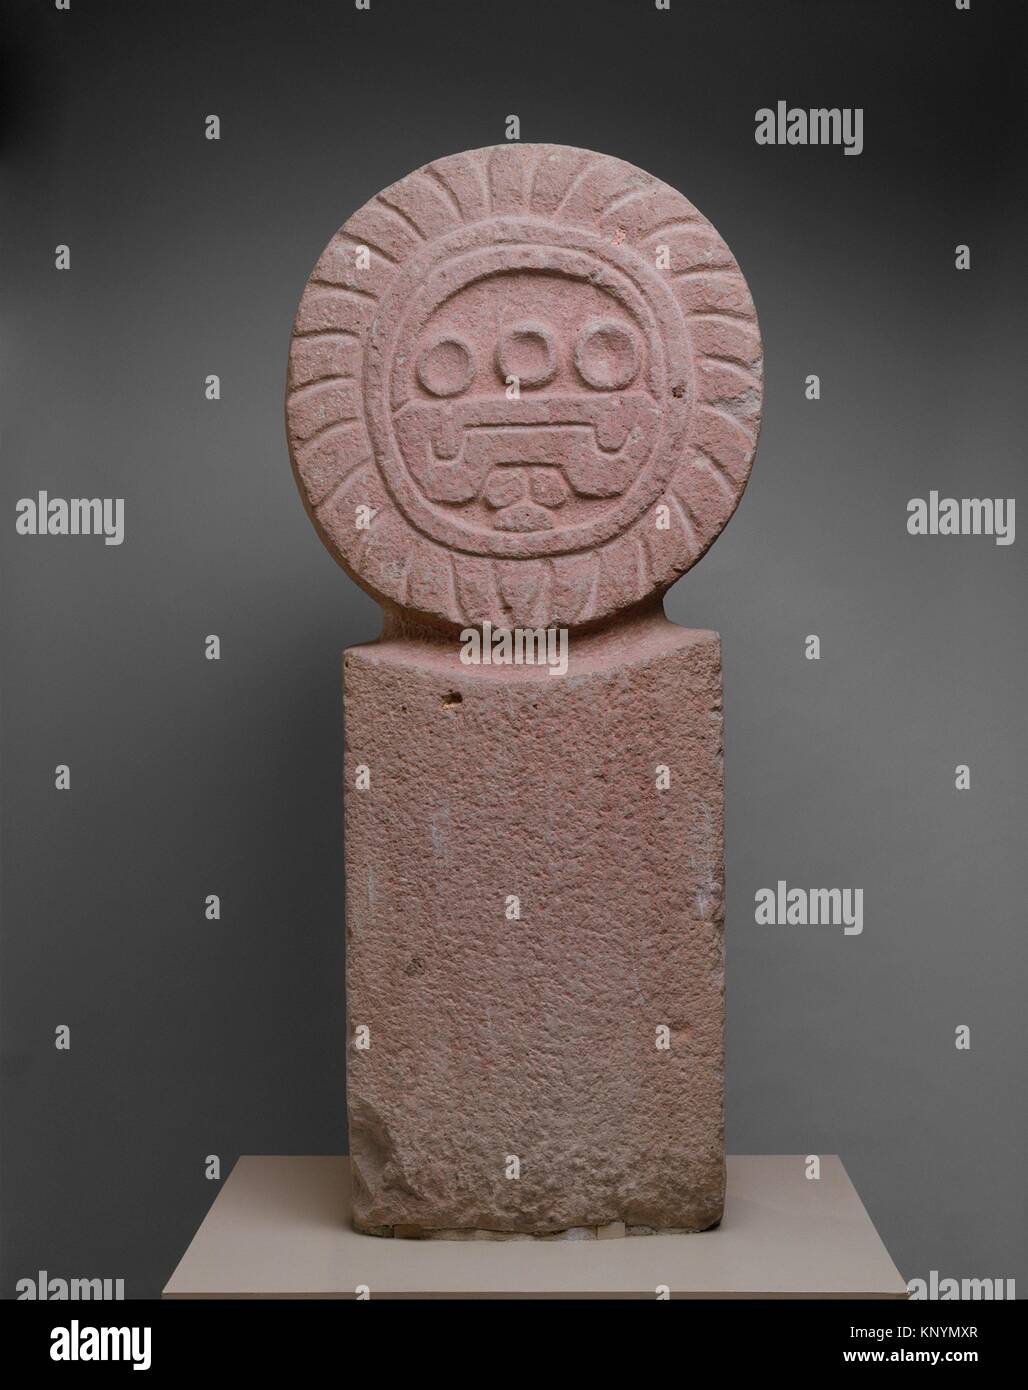 Stela. Date: 3rd-7th century; Geography: Mexico, Mesoamerica; Culture: Teotihuacan; Medium: Stone; Dimensions: H. 41 3/4 x W. 14 3/4 x D. 8 in. (106 Stock Photo